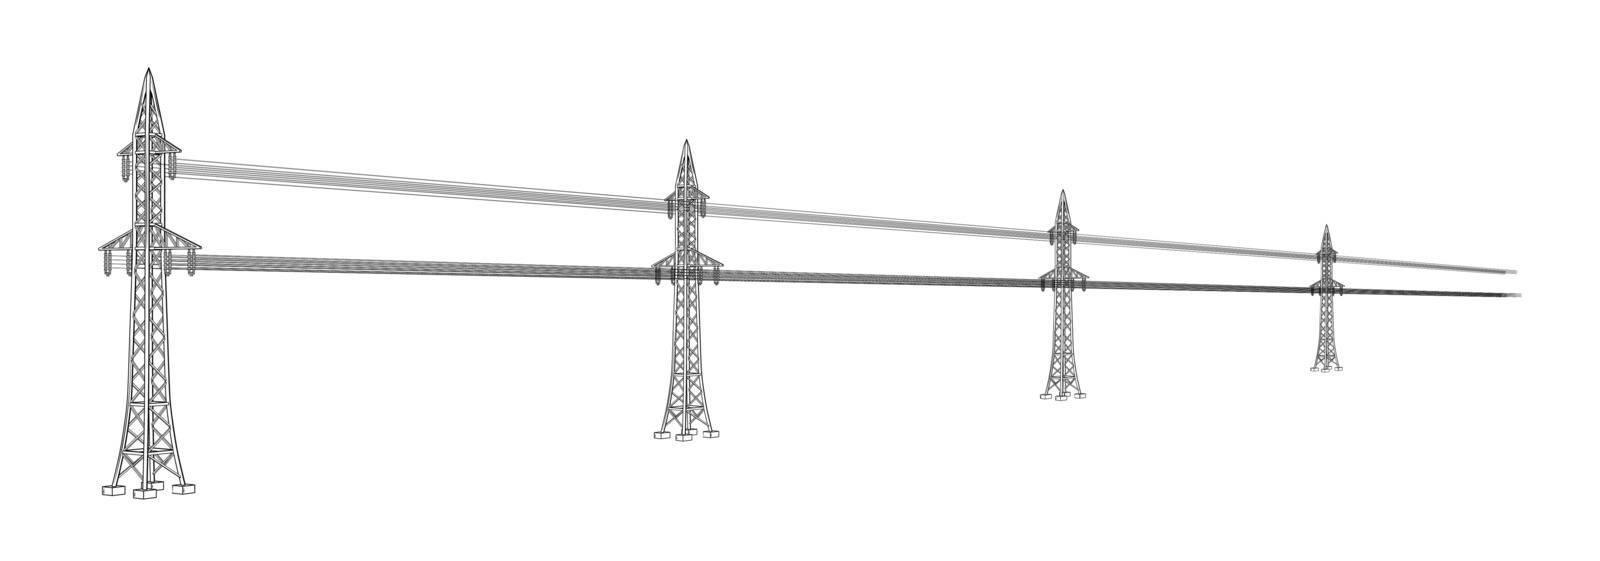 High voltage power lines. High voltage pylons connected with wires.  Black outline illustration on white background. Sketch.